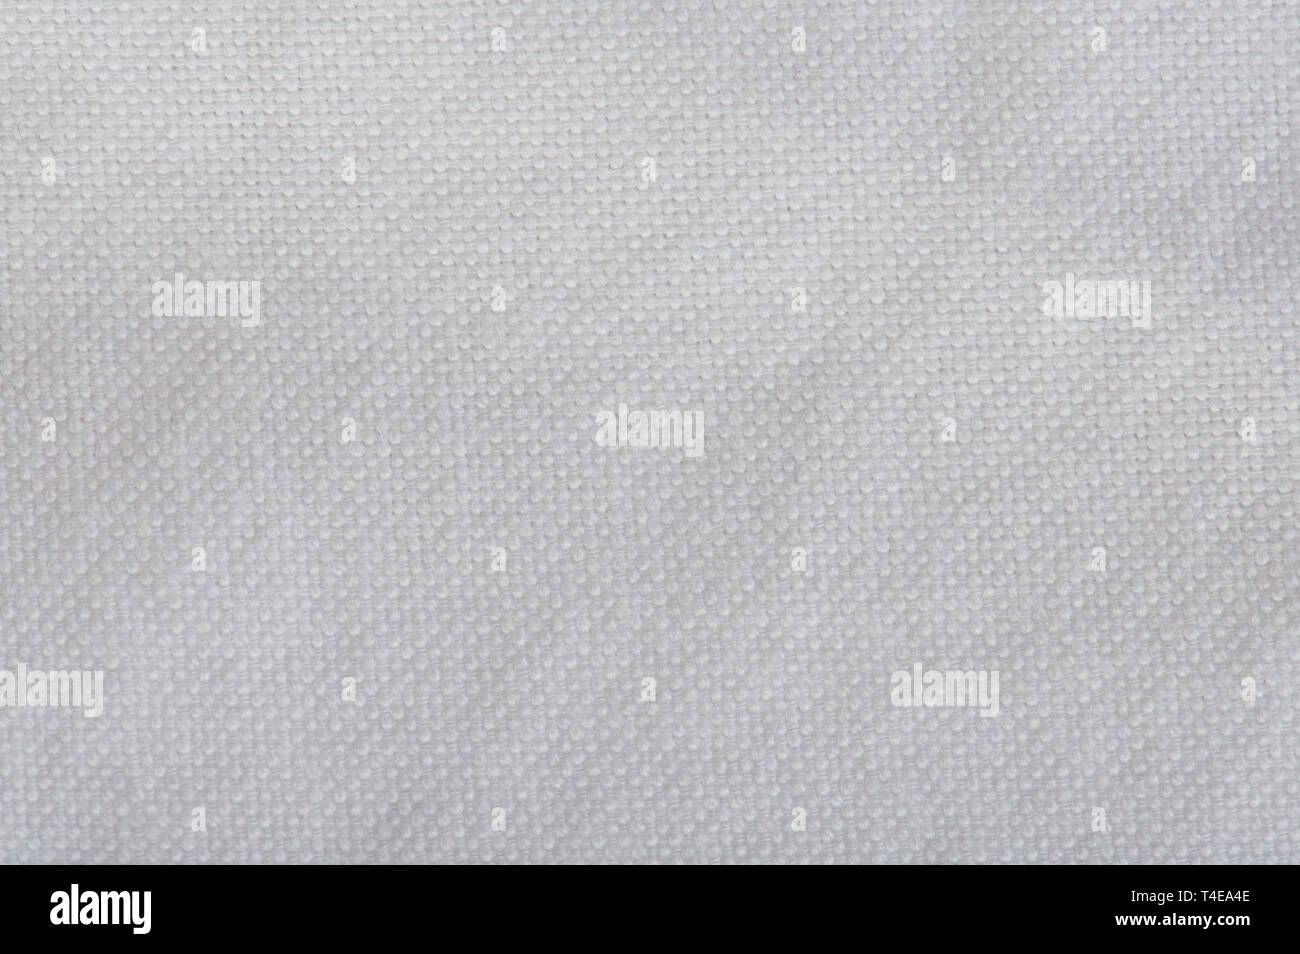 texture of white cotton surface macro close up view Stock Photo